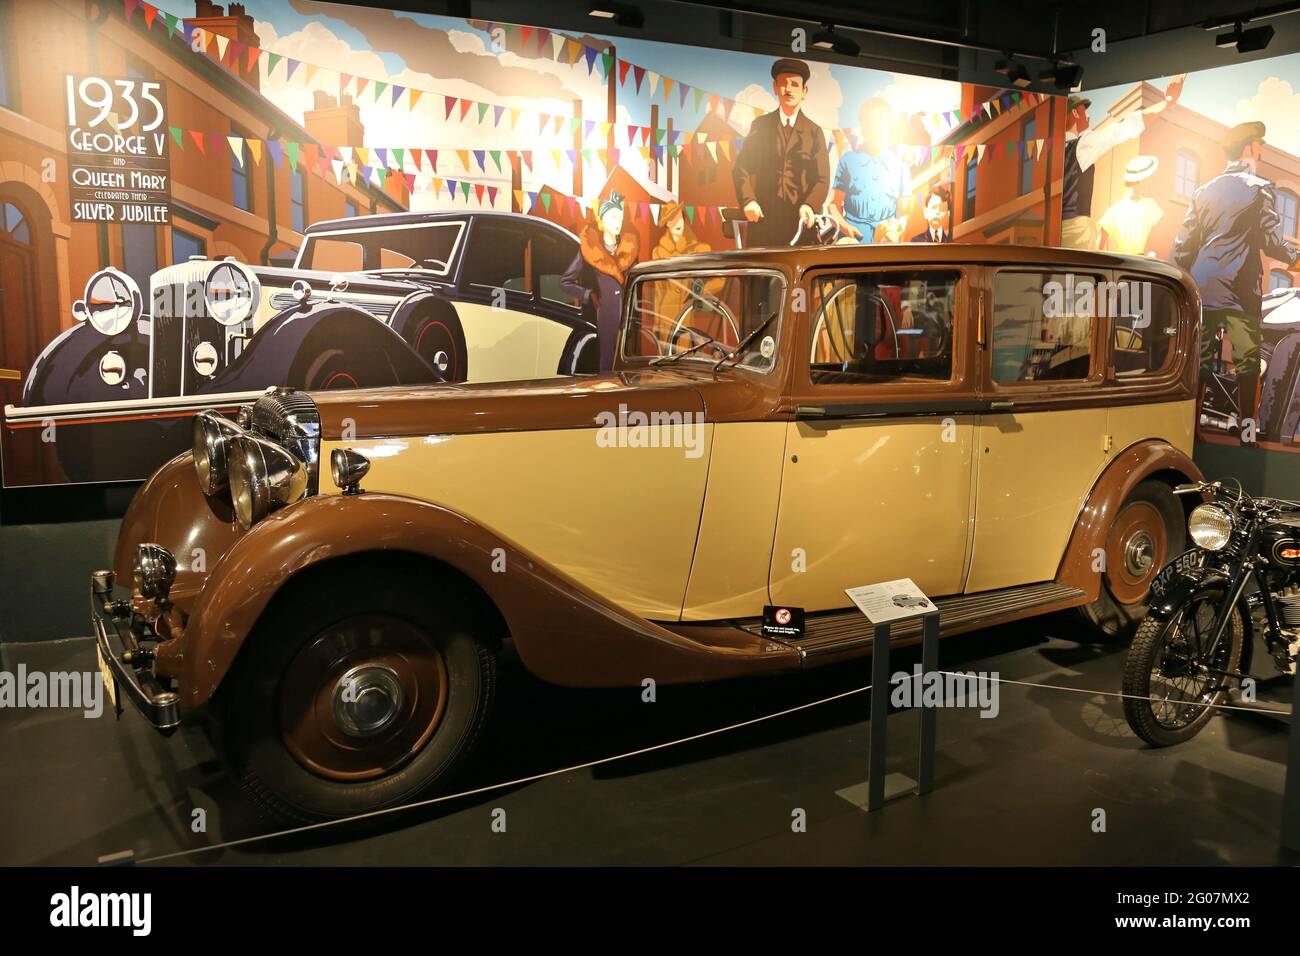 Daimler Limousine (1937), Coventry Transport Museum, Millennium Place, Coventry, West Midlands, England, Great Britain, UK, Europe Stock Photo